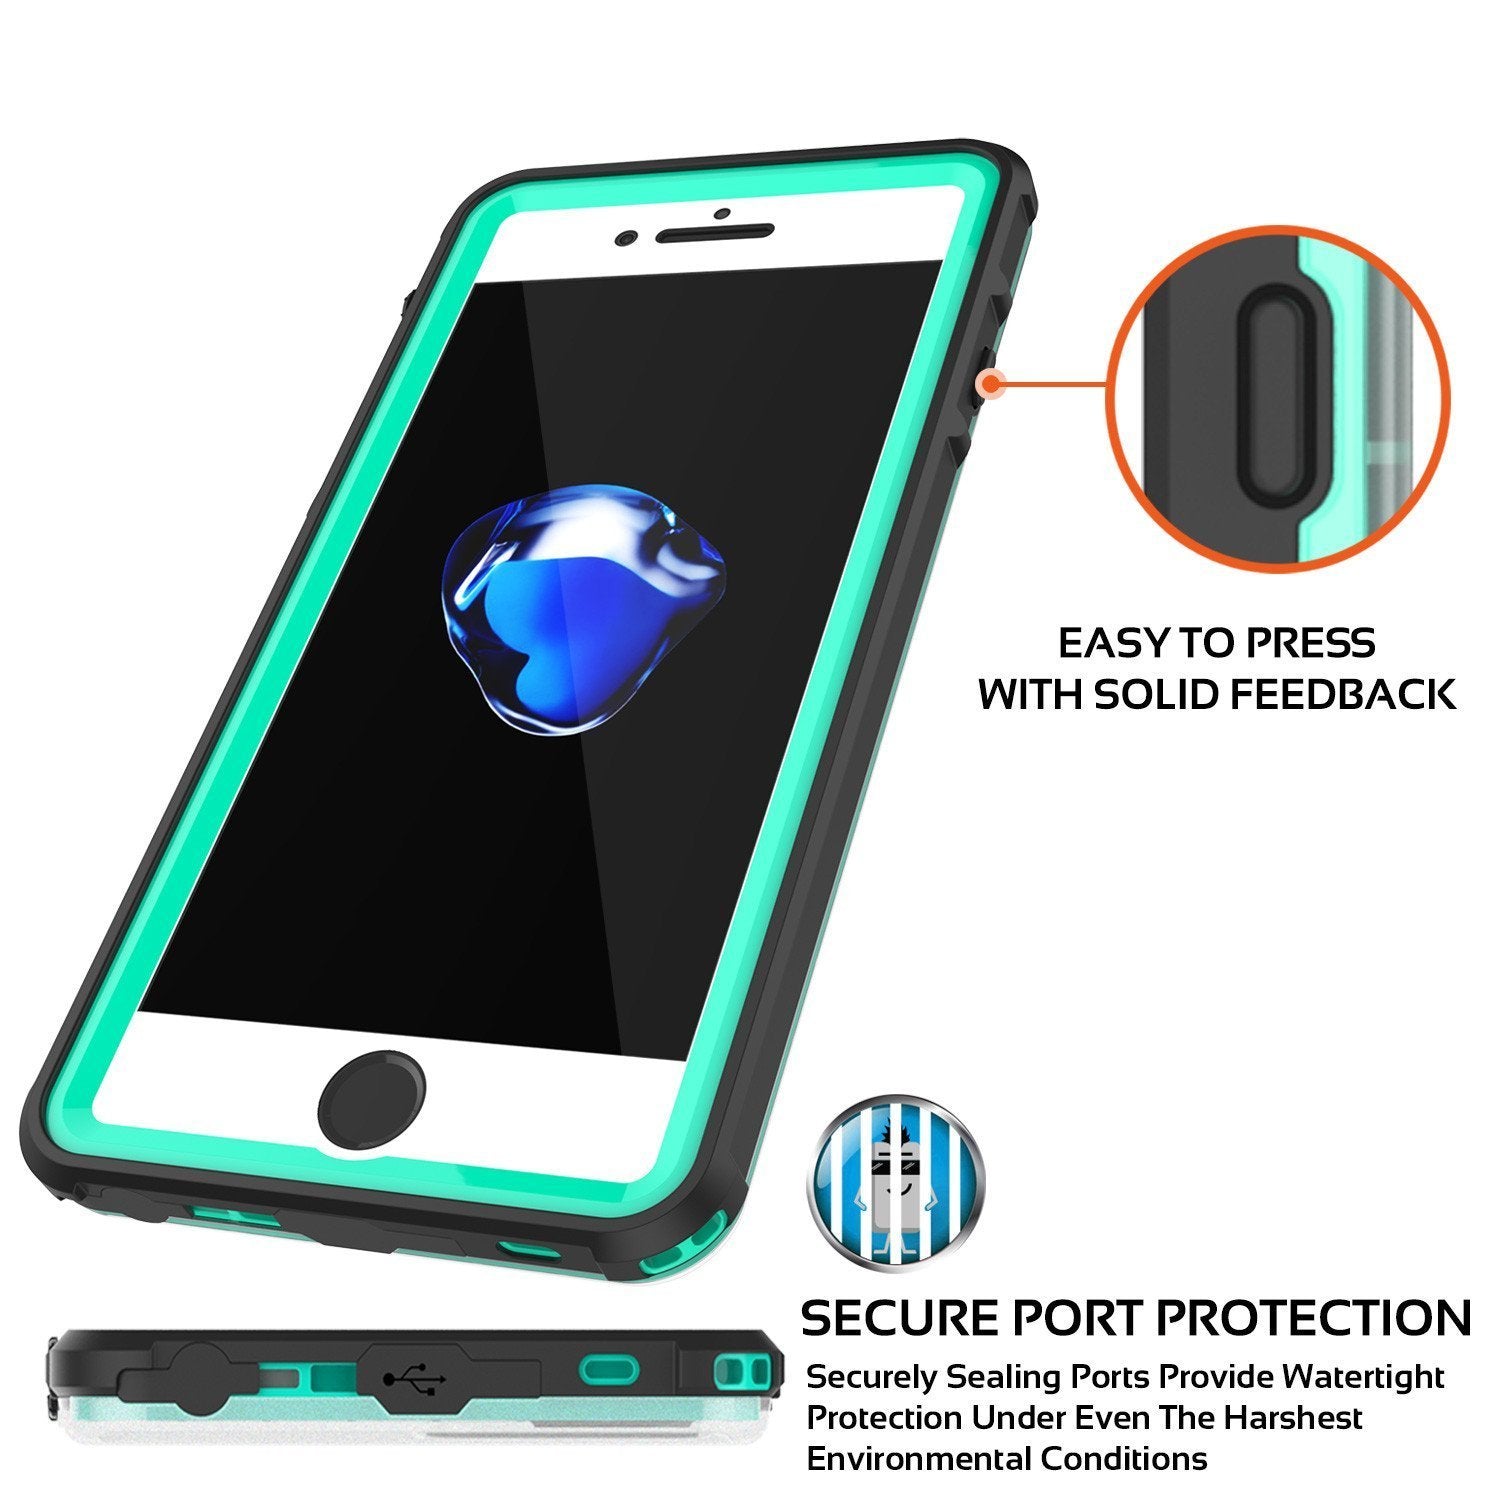 Apple iPhone 8 Waterproof Case, PUNKcase CRYSTAL Teal W/ Attached Screen Protector  | Warranty